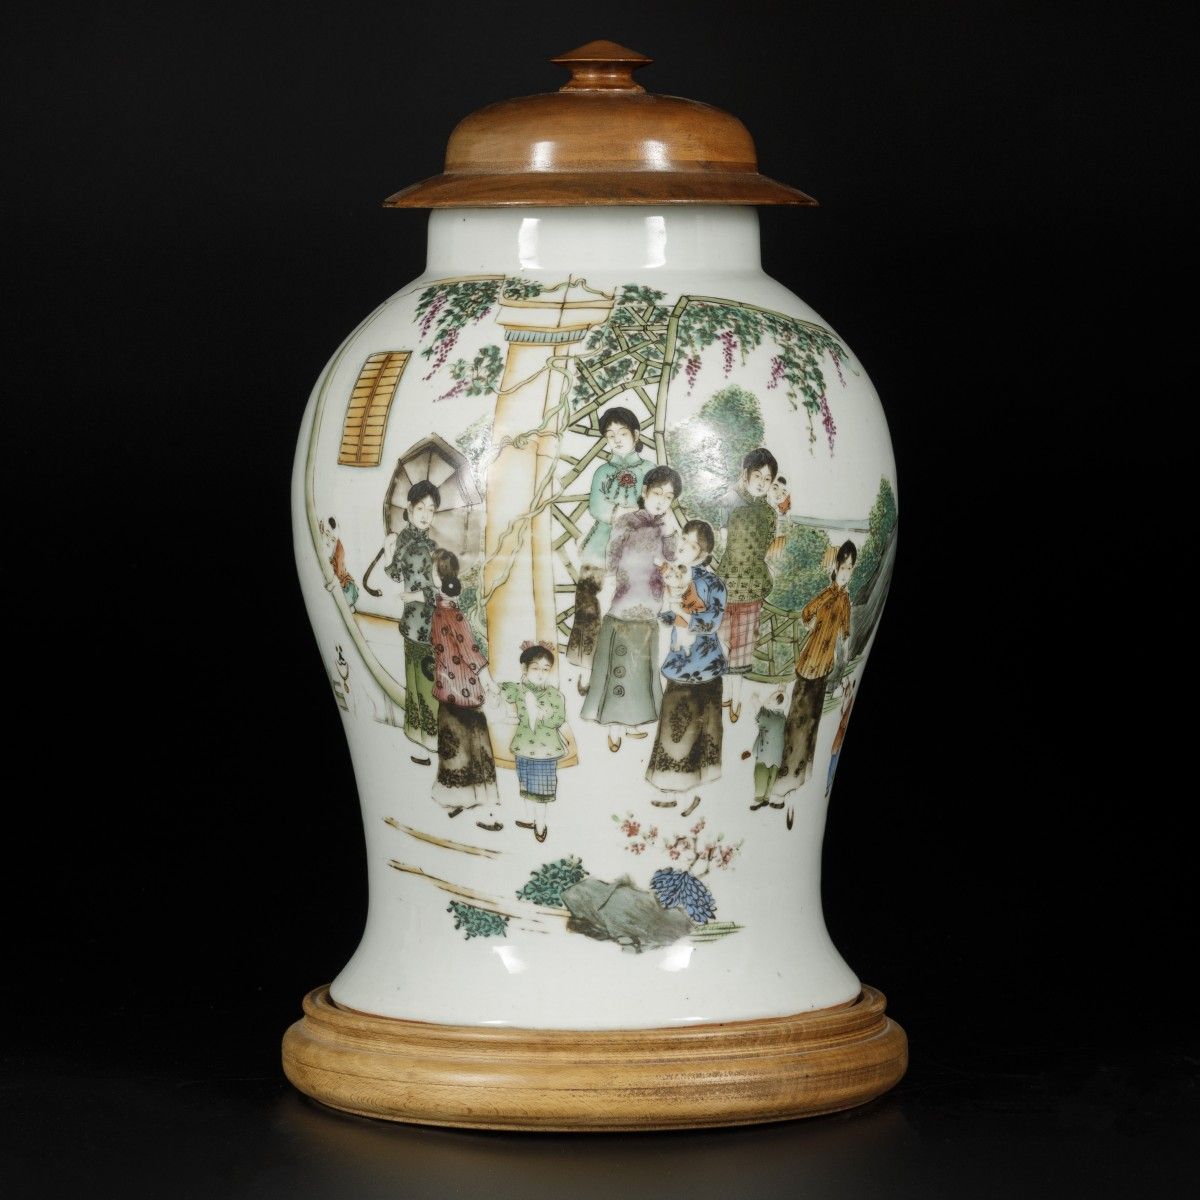 A porcelain lidded vase with Qianjiang Cai decor, China, 19/20th century. Con ta&hellip;